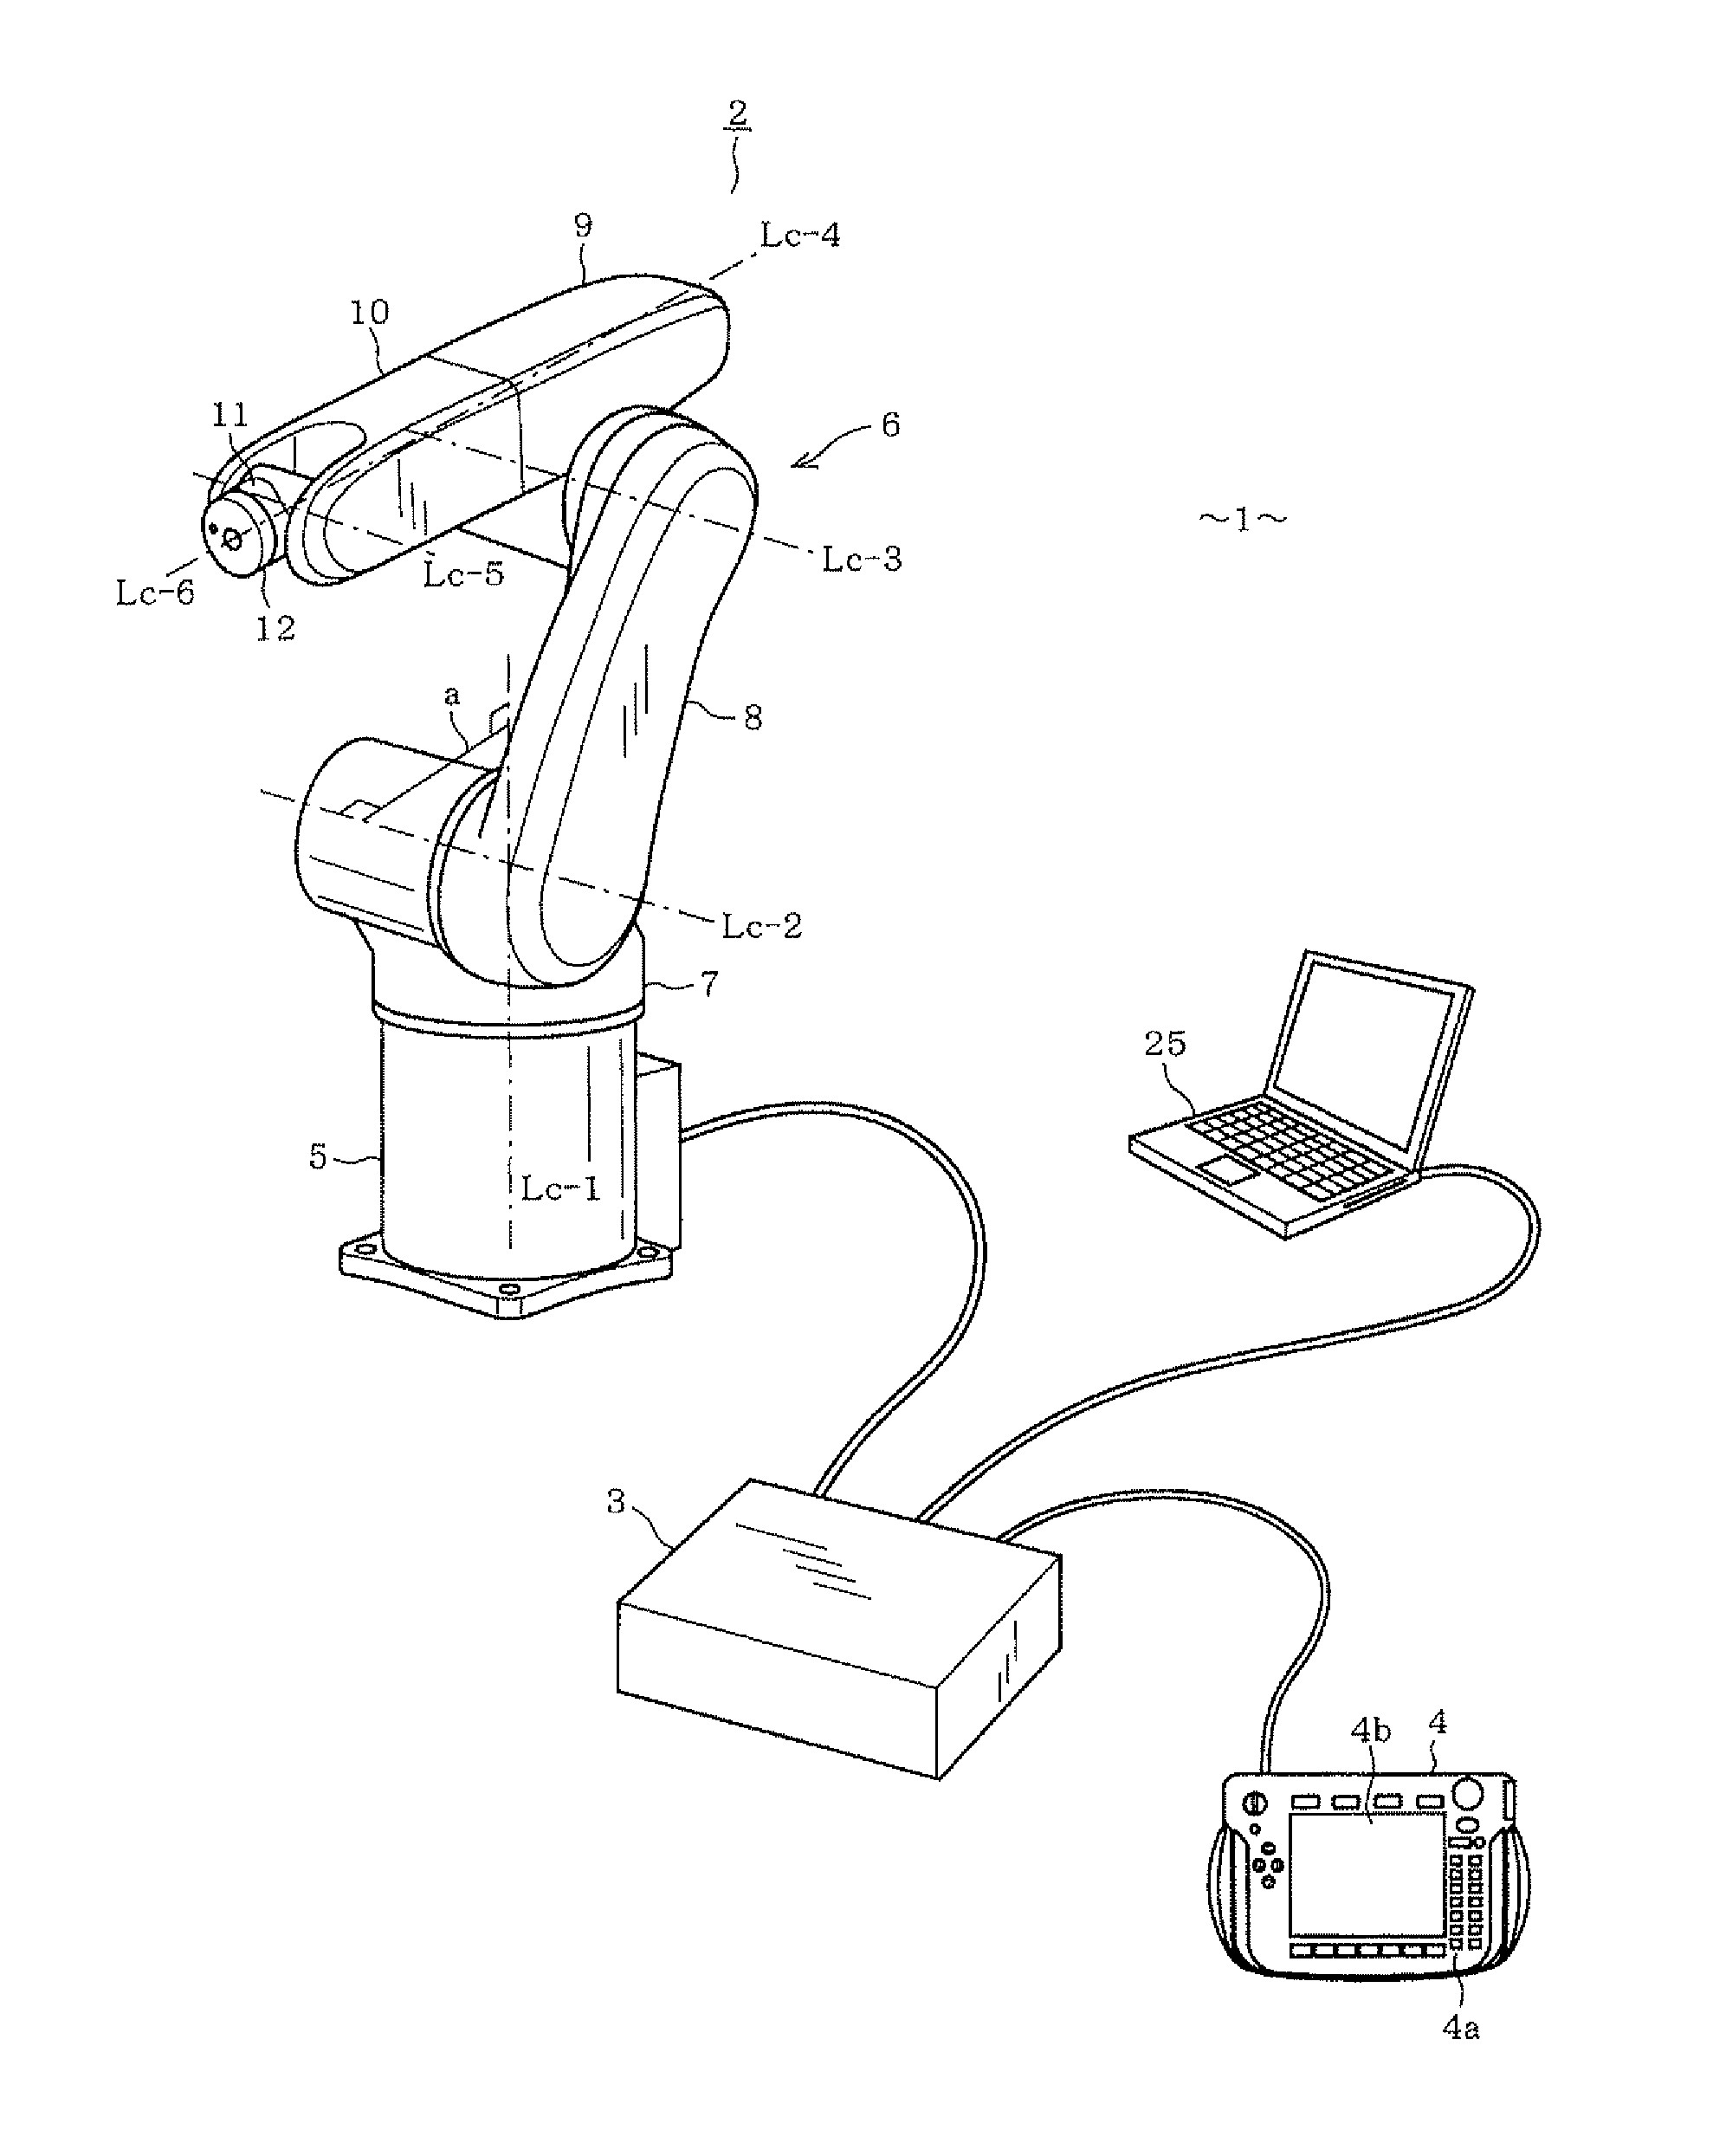 Method of detecting an inter-axis offset of 6-axis robot